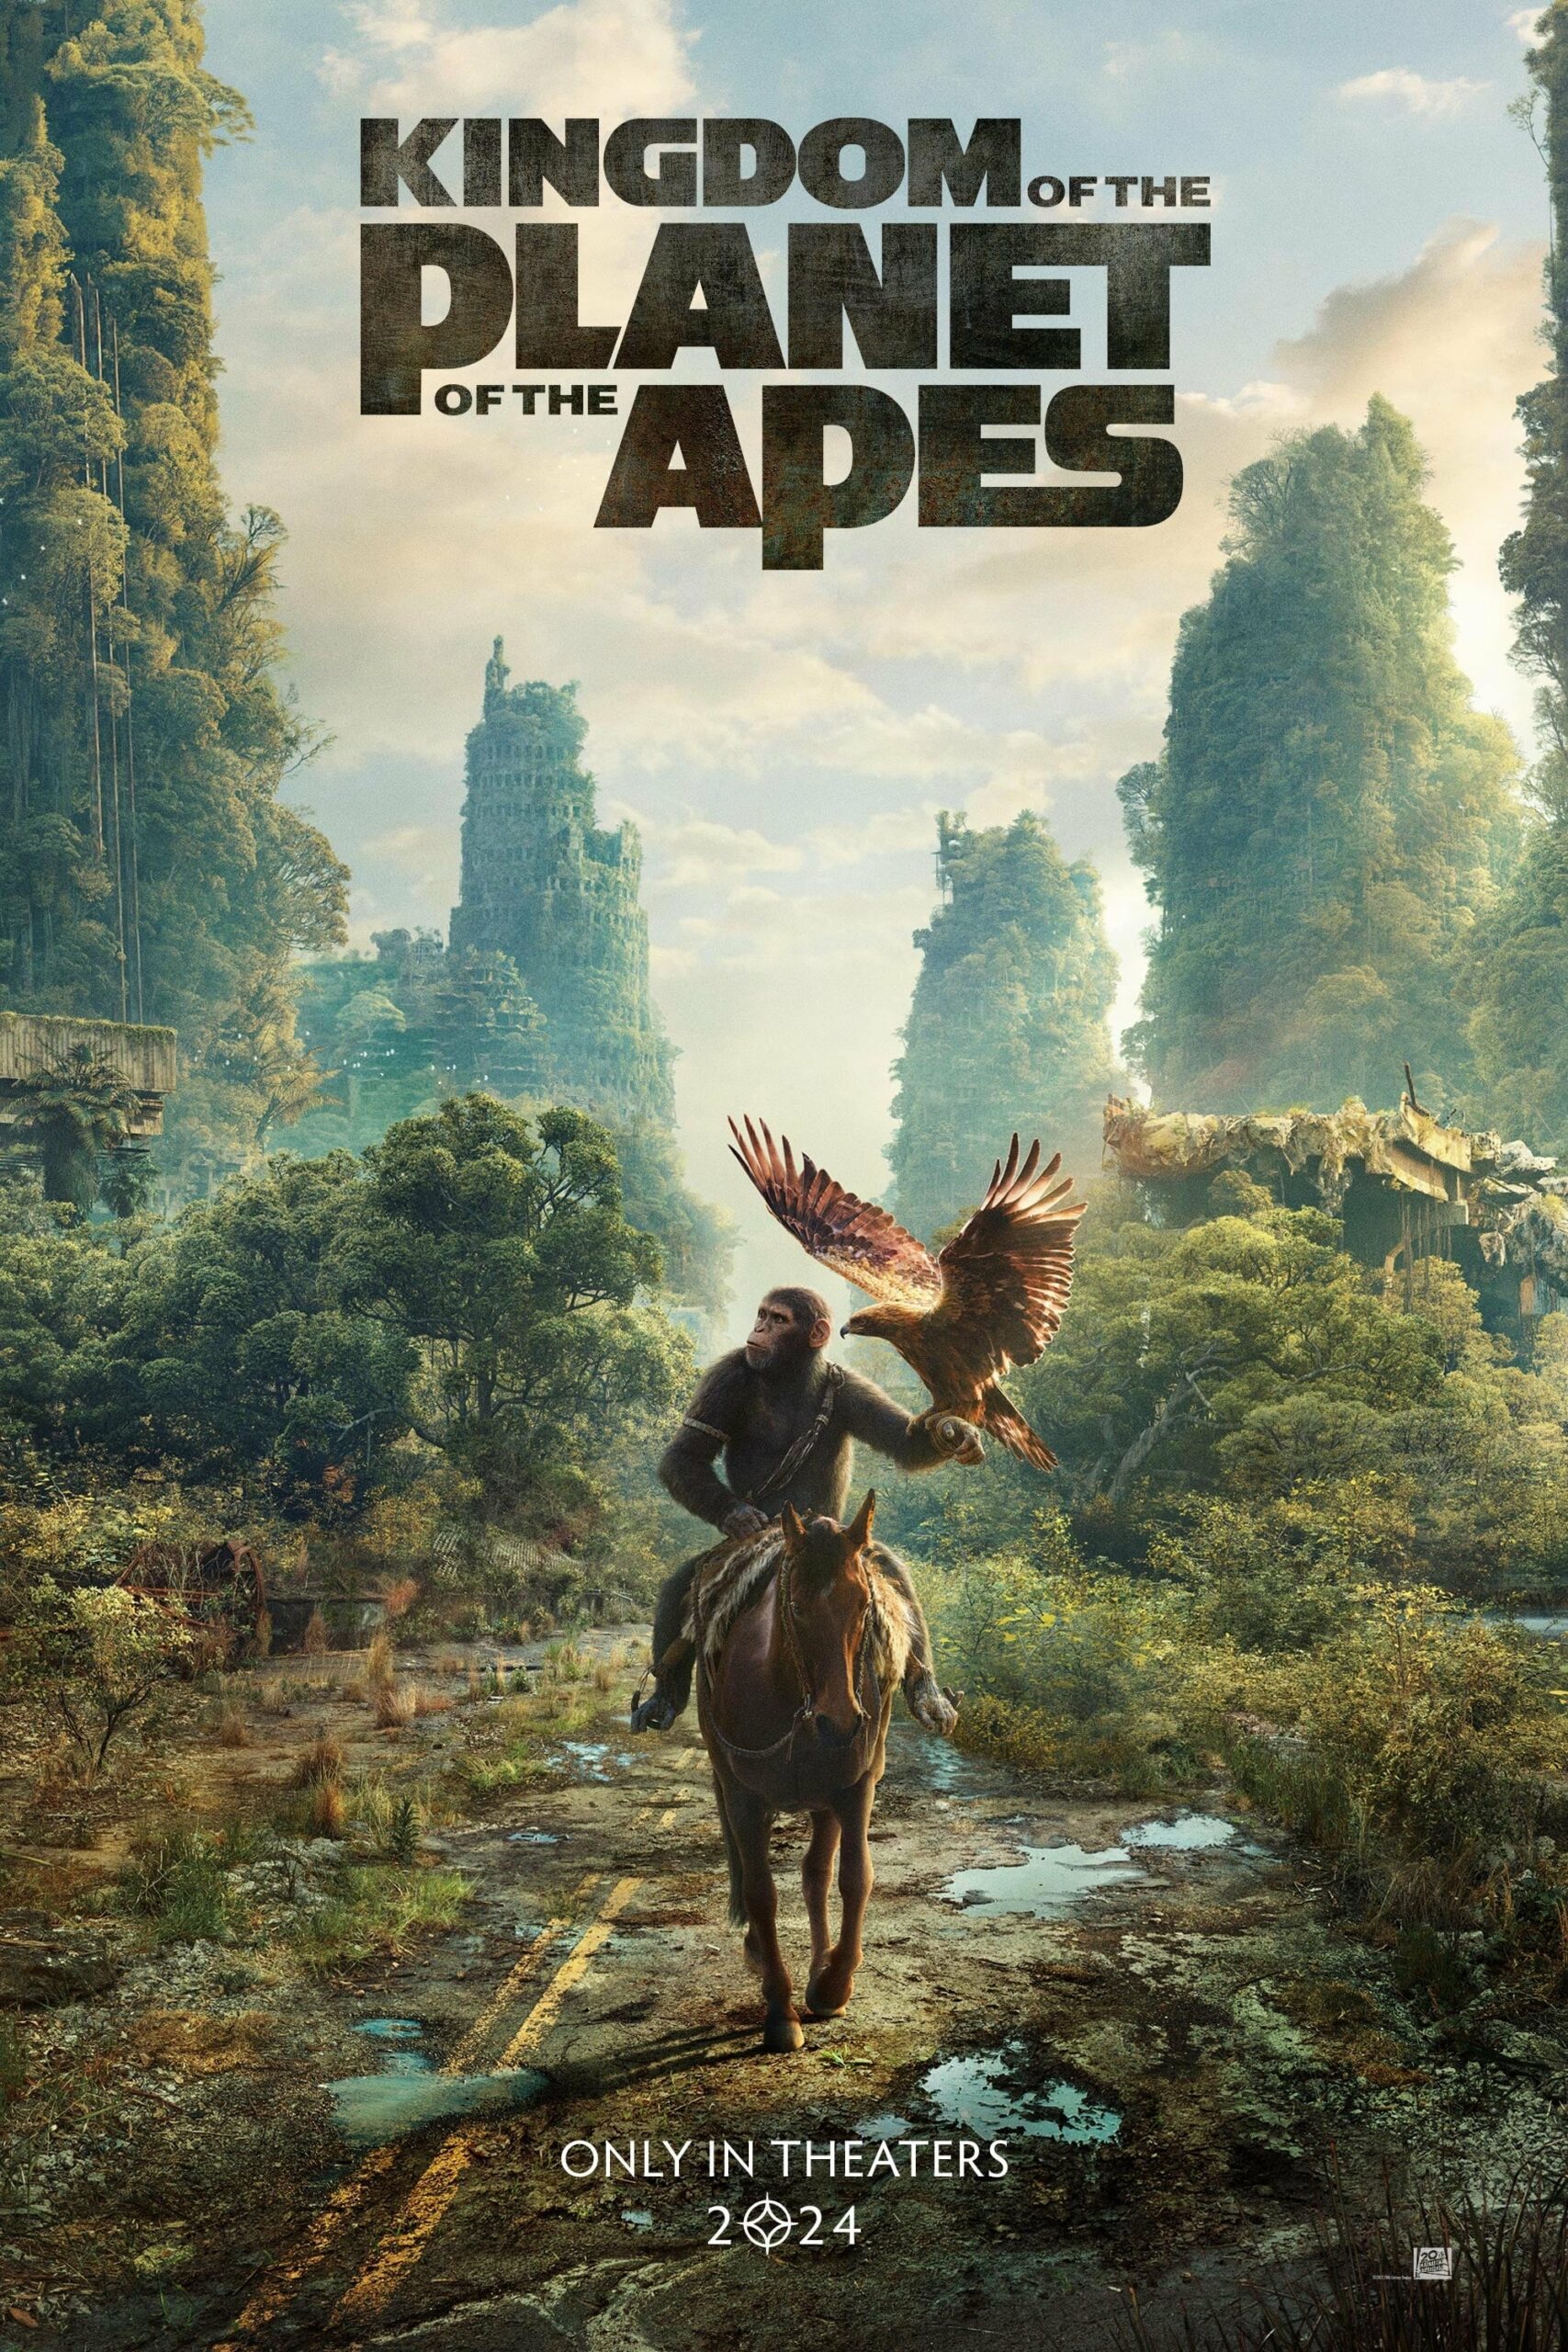 Apes Reign Supreme in New Teaser Trailer for ‘Kingdom of the Planet of the Apes’